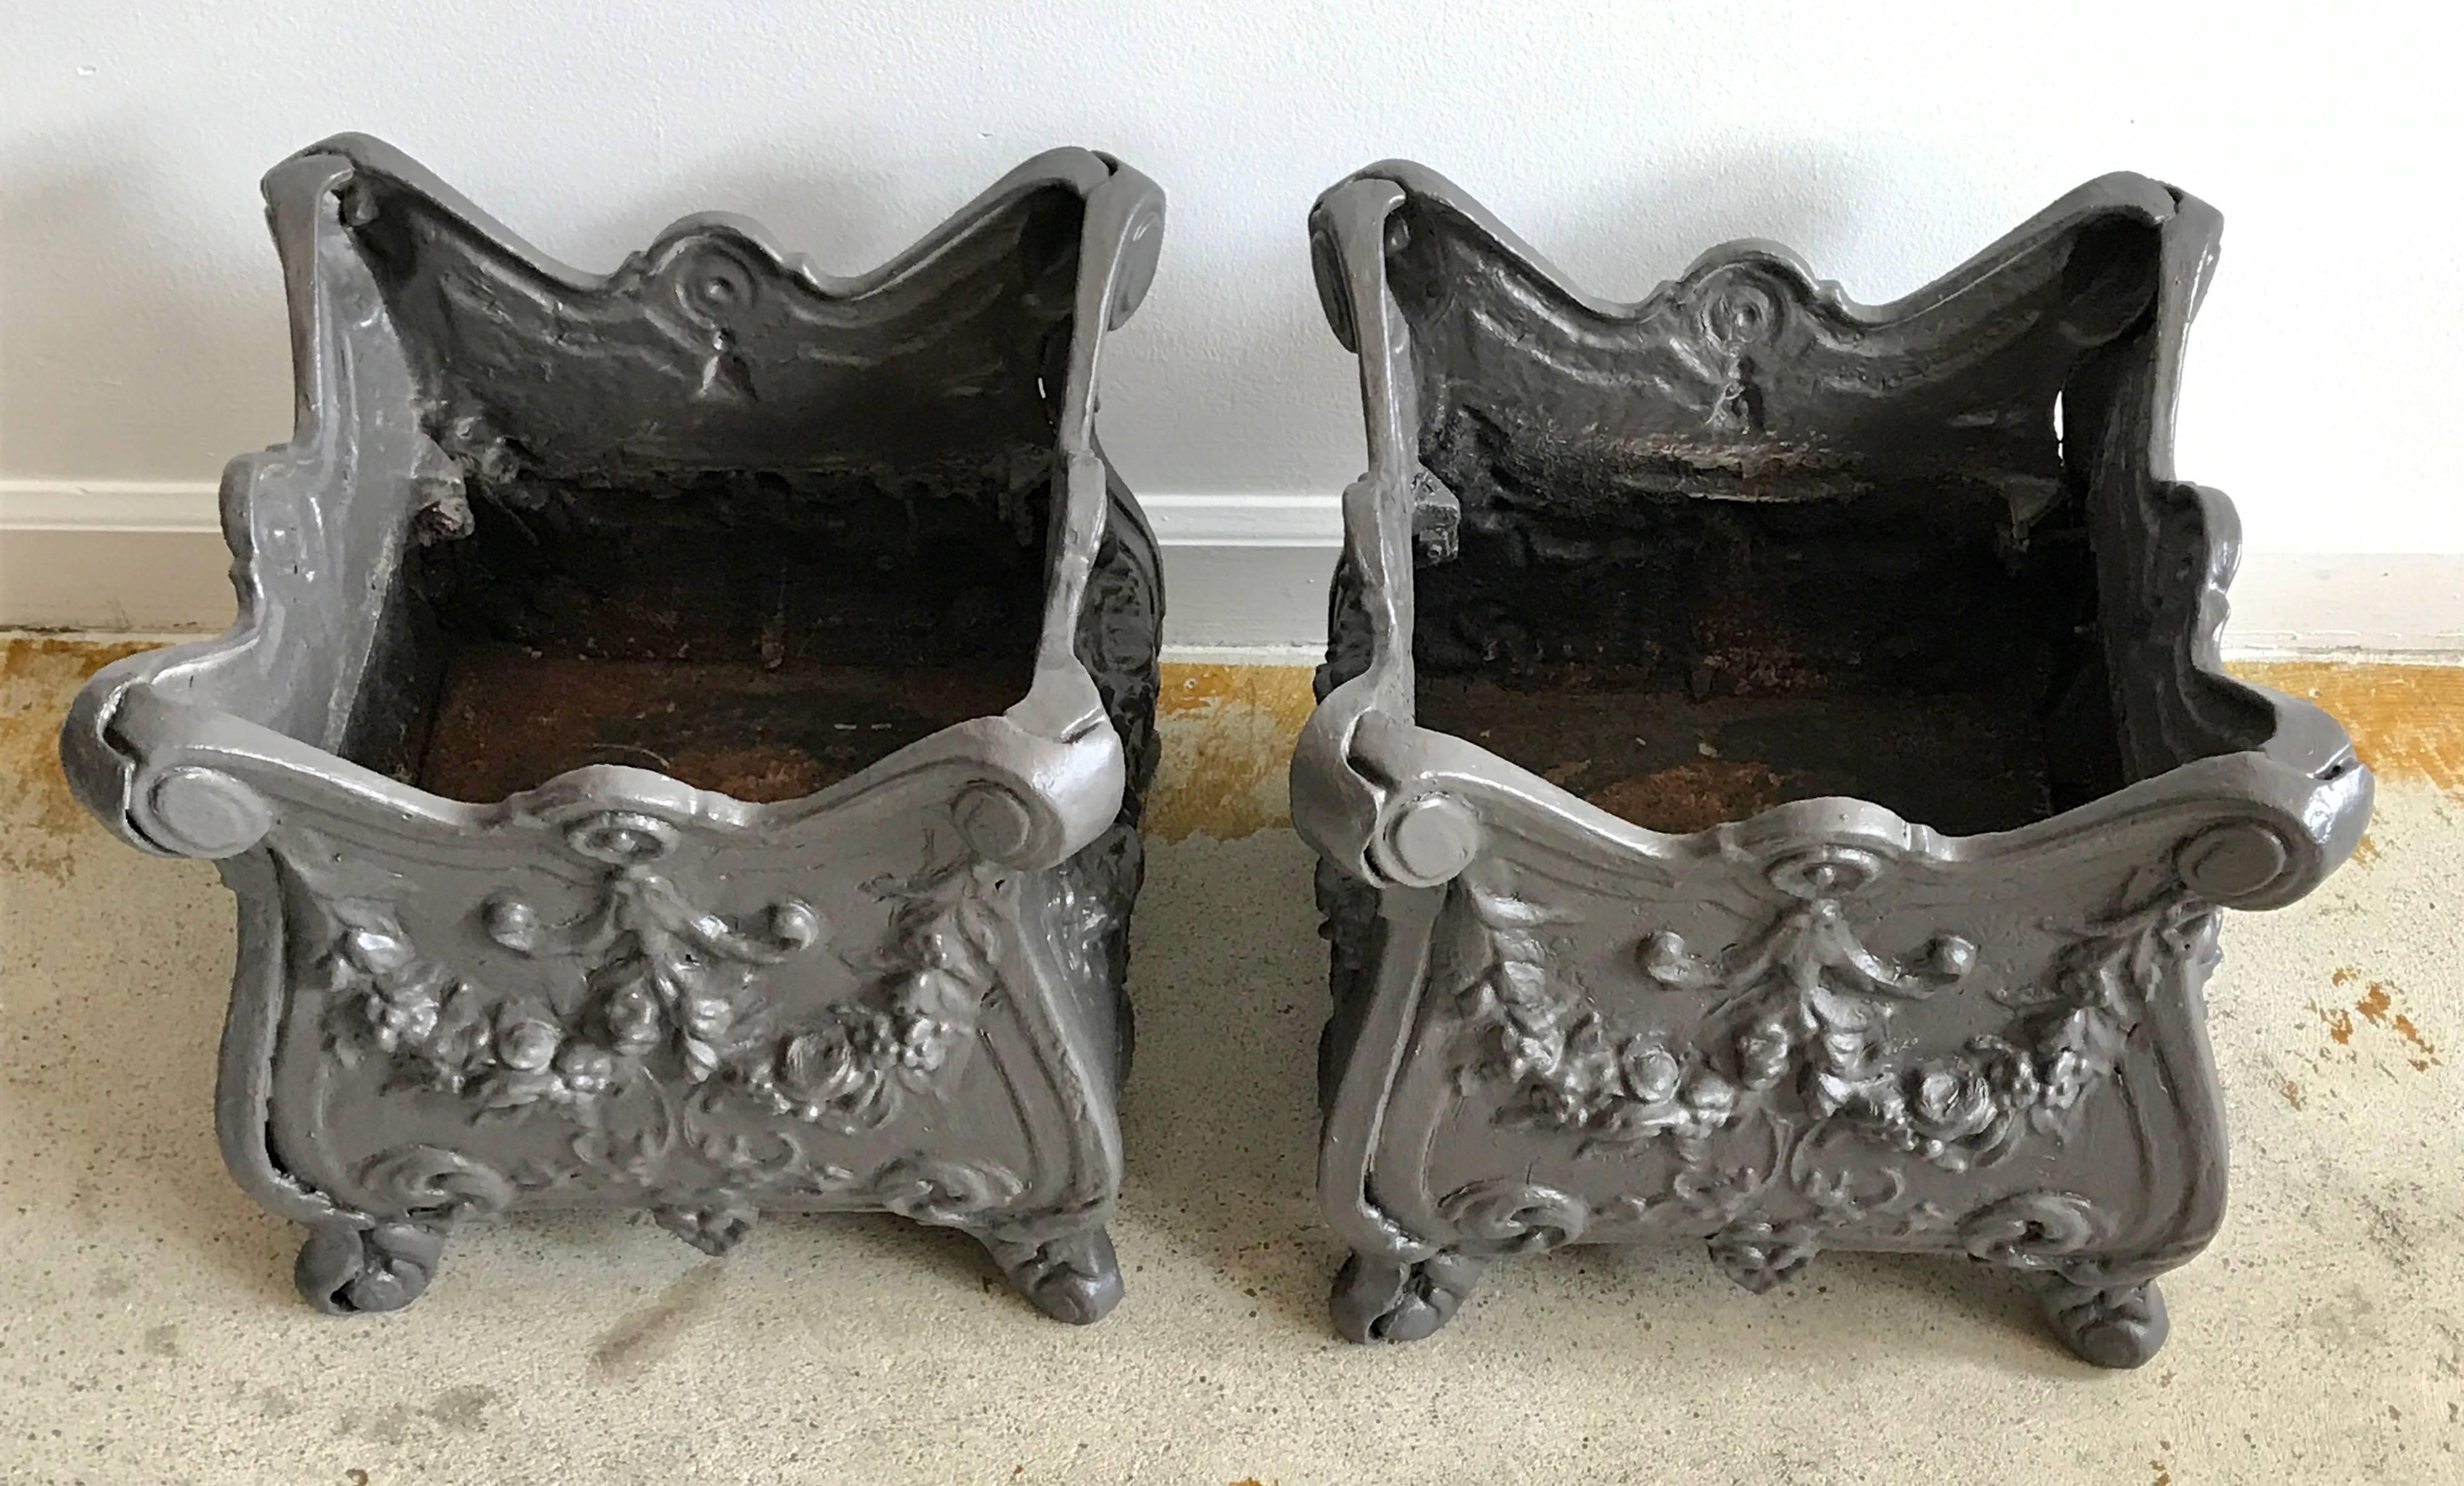 Really nice pair of square cast iron planters, beautiful lines and detail. Freshly painted, anodized bronze color.